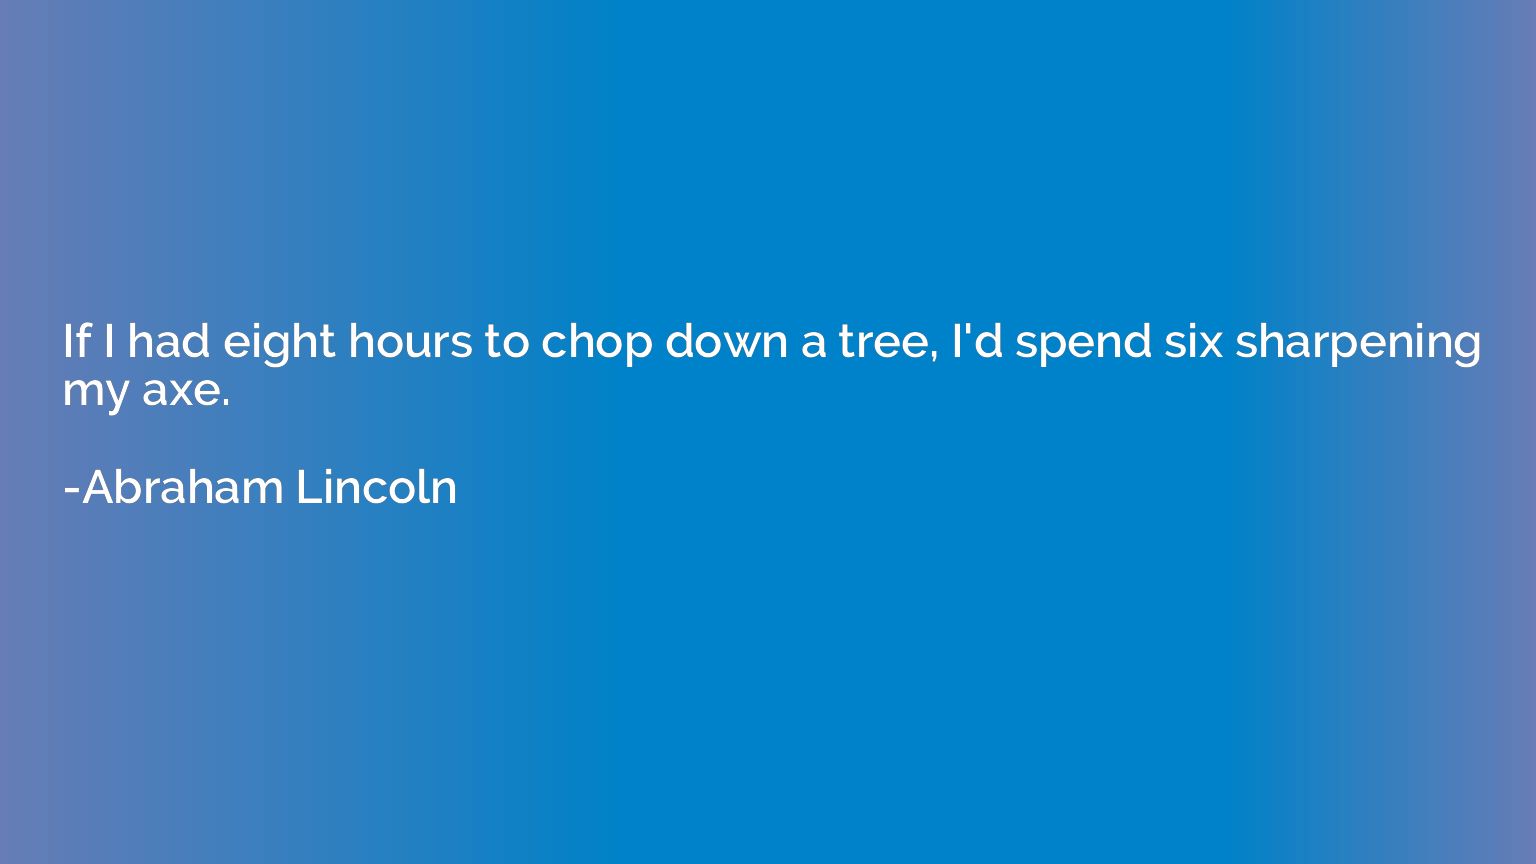 If I had eight hours to chop down a tree, I'd spend six shar